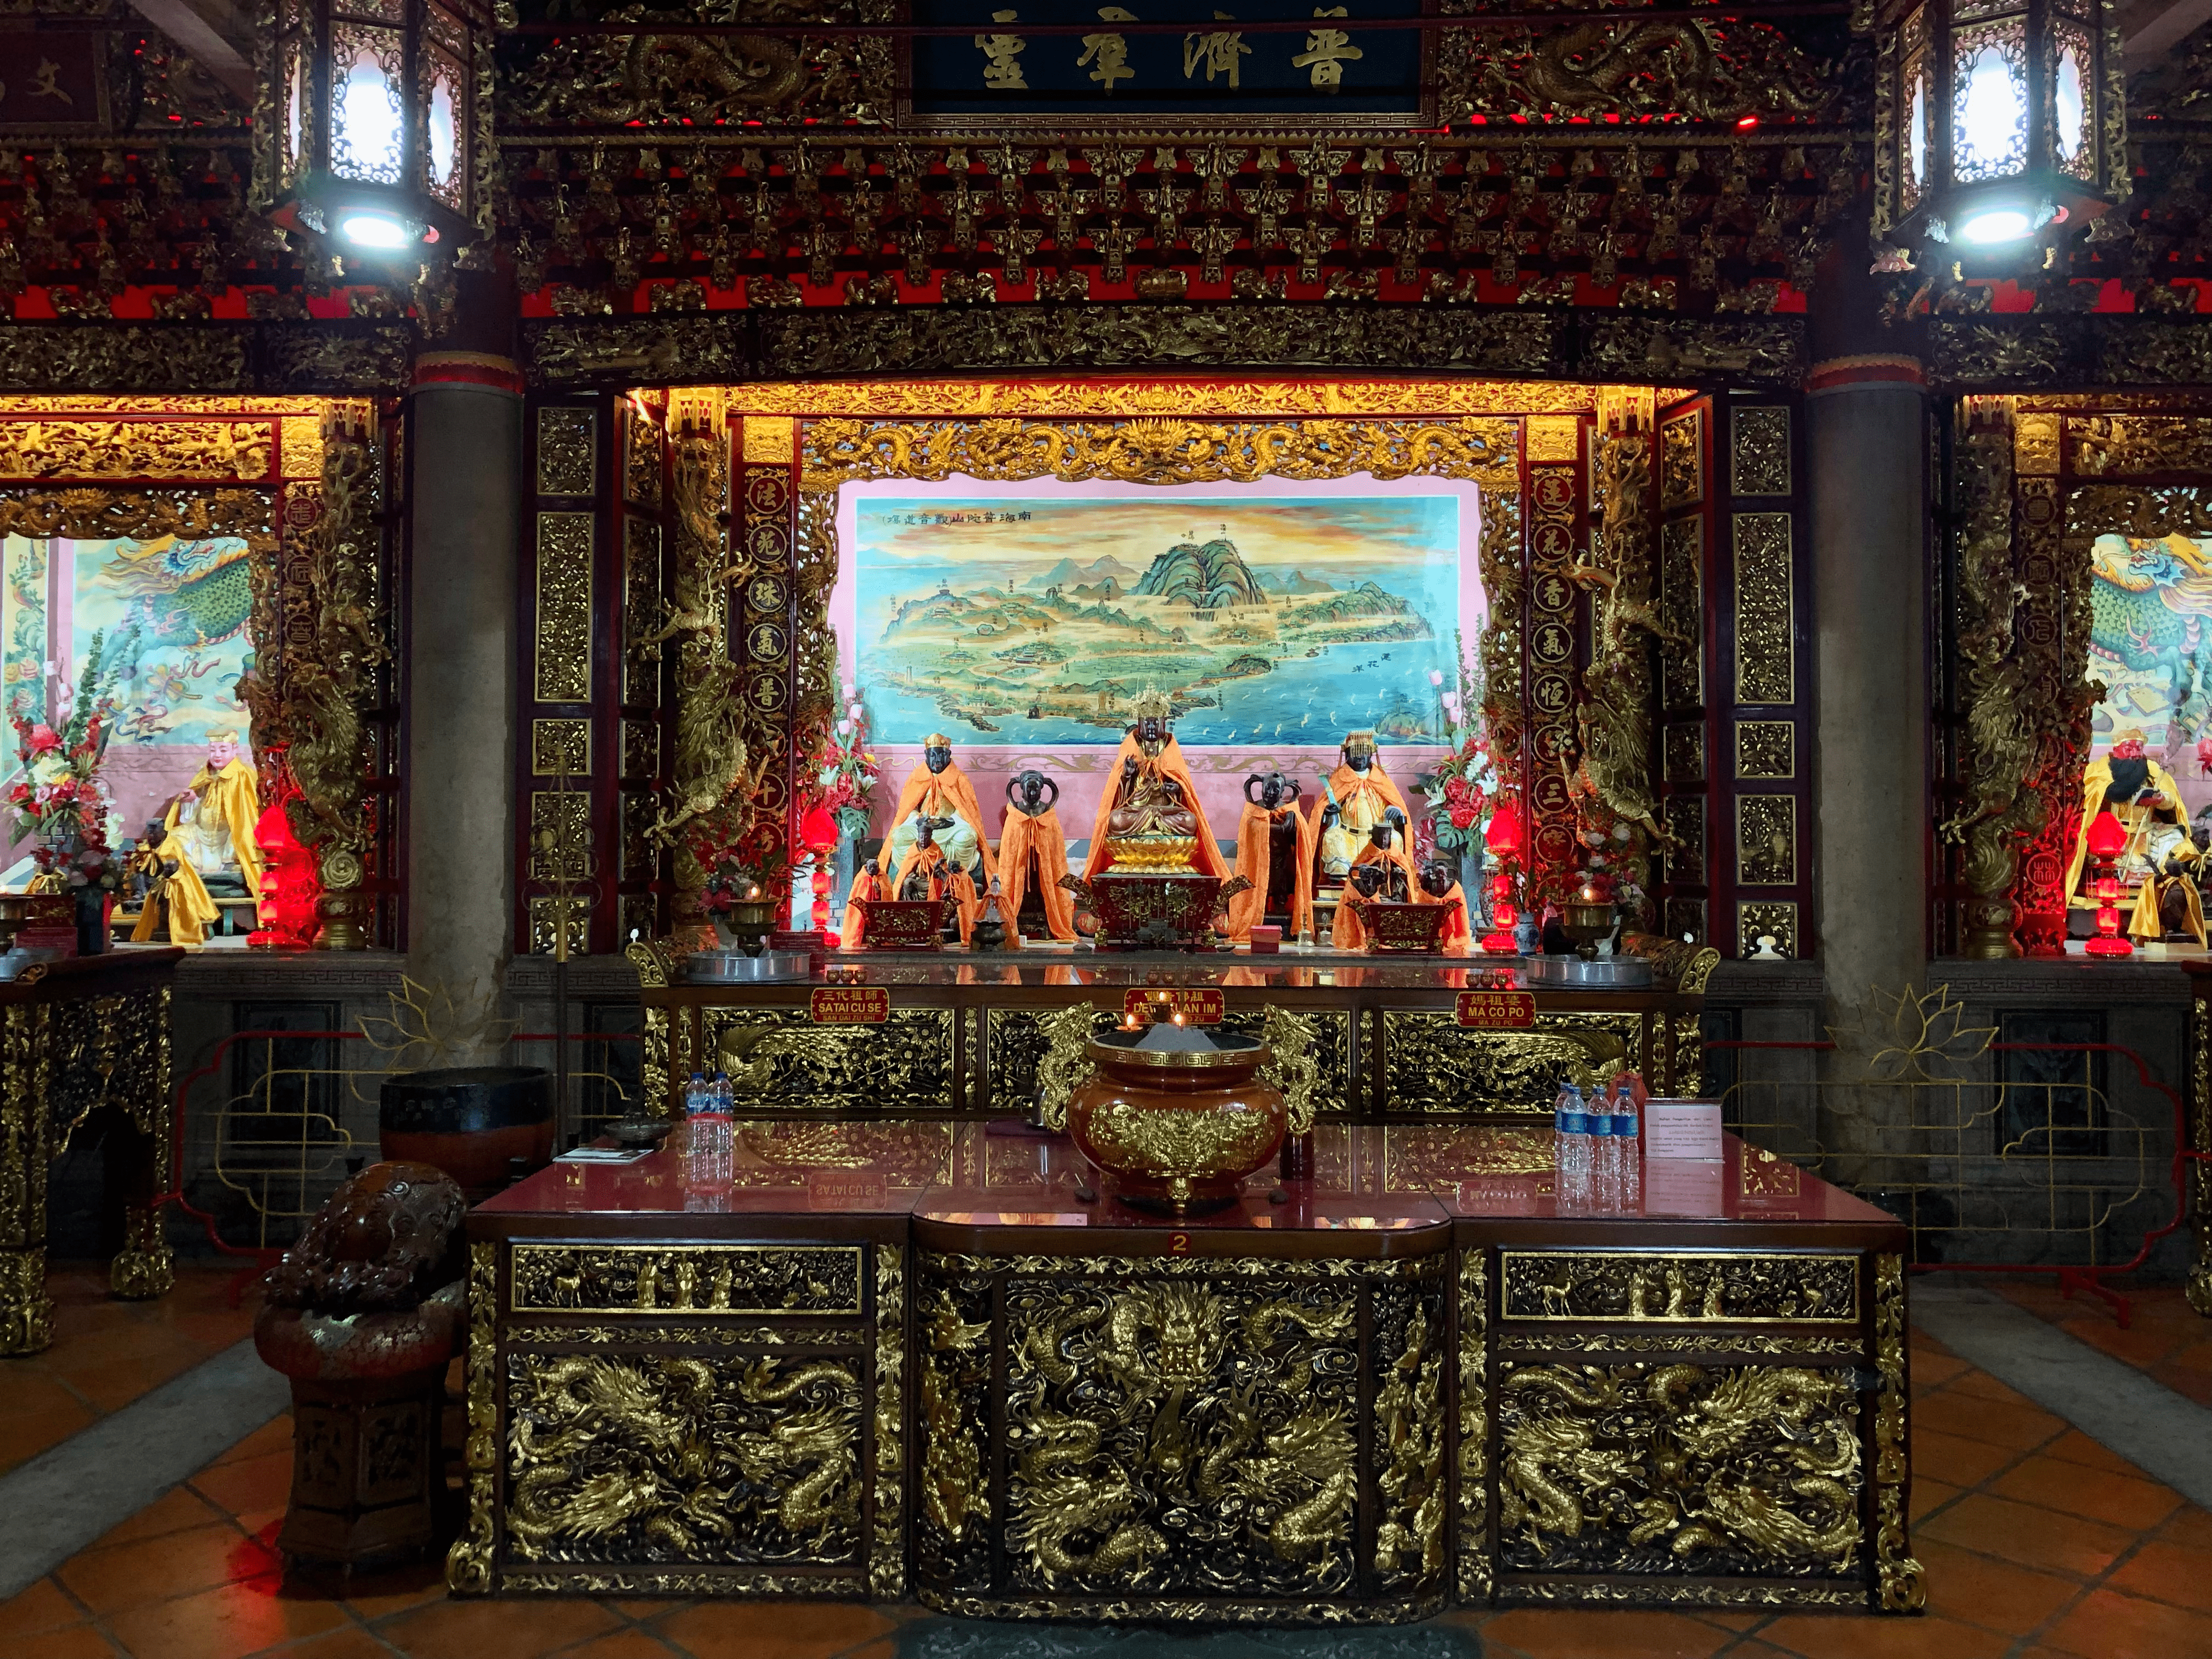 Inside the Taoist temple I visited, which incorporates Taoist, Buddhist, and traditional Chinese influences.